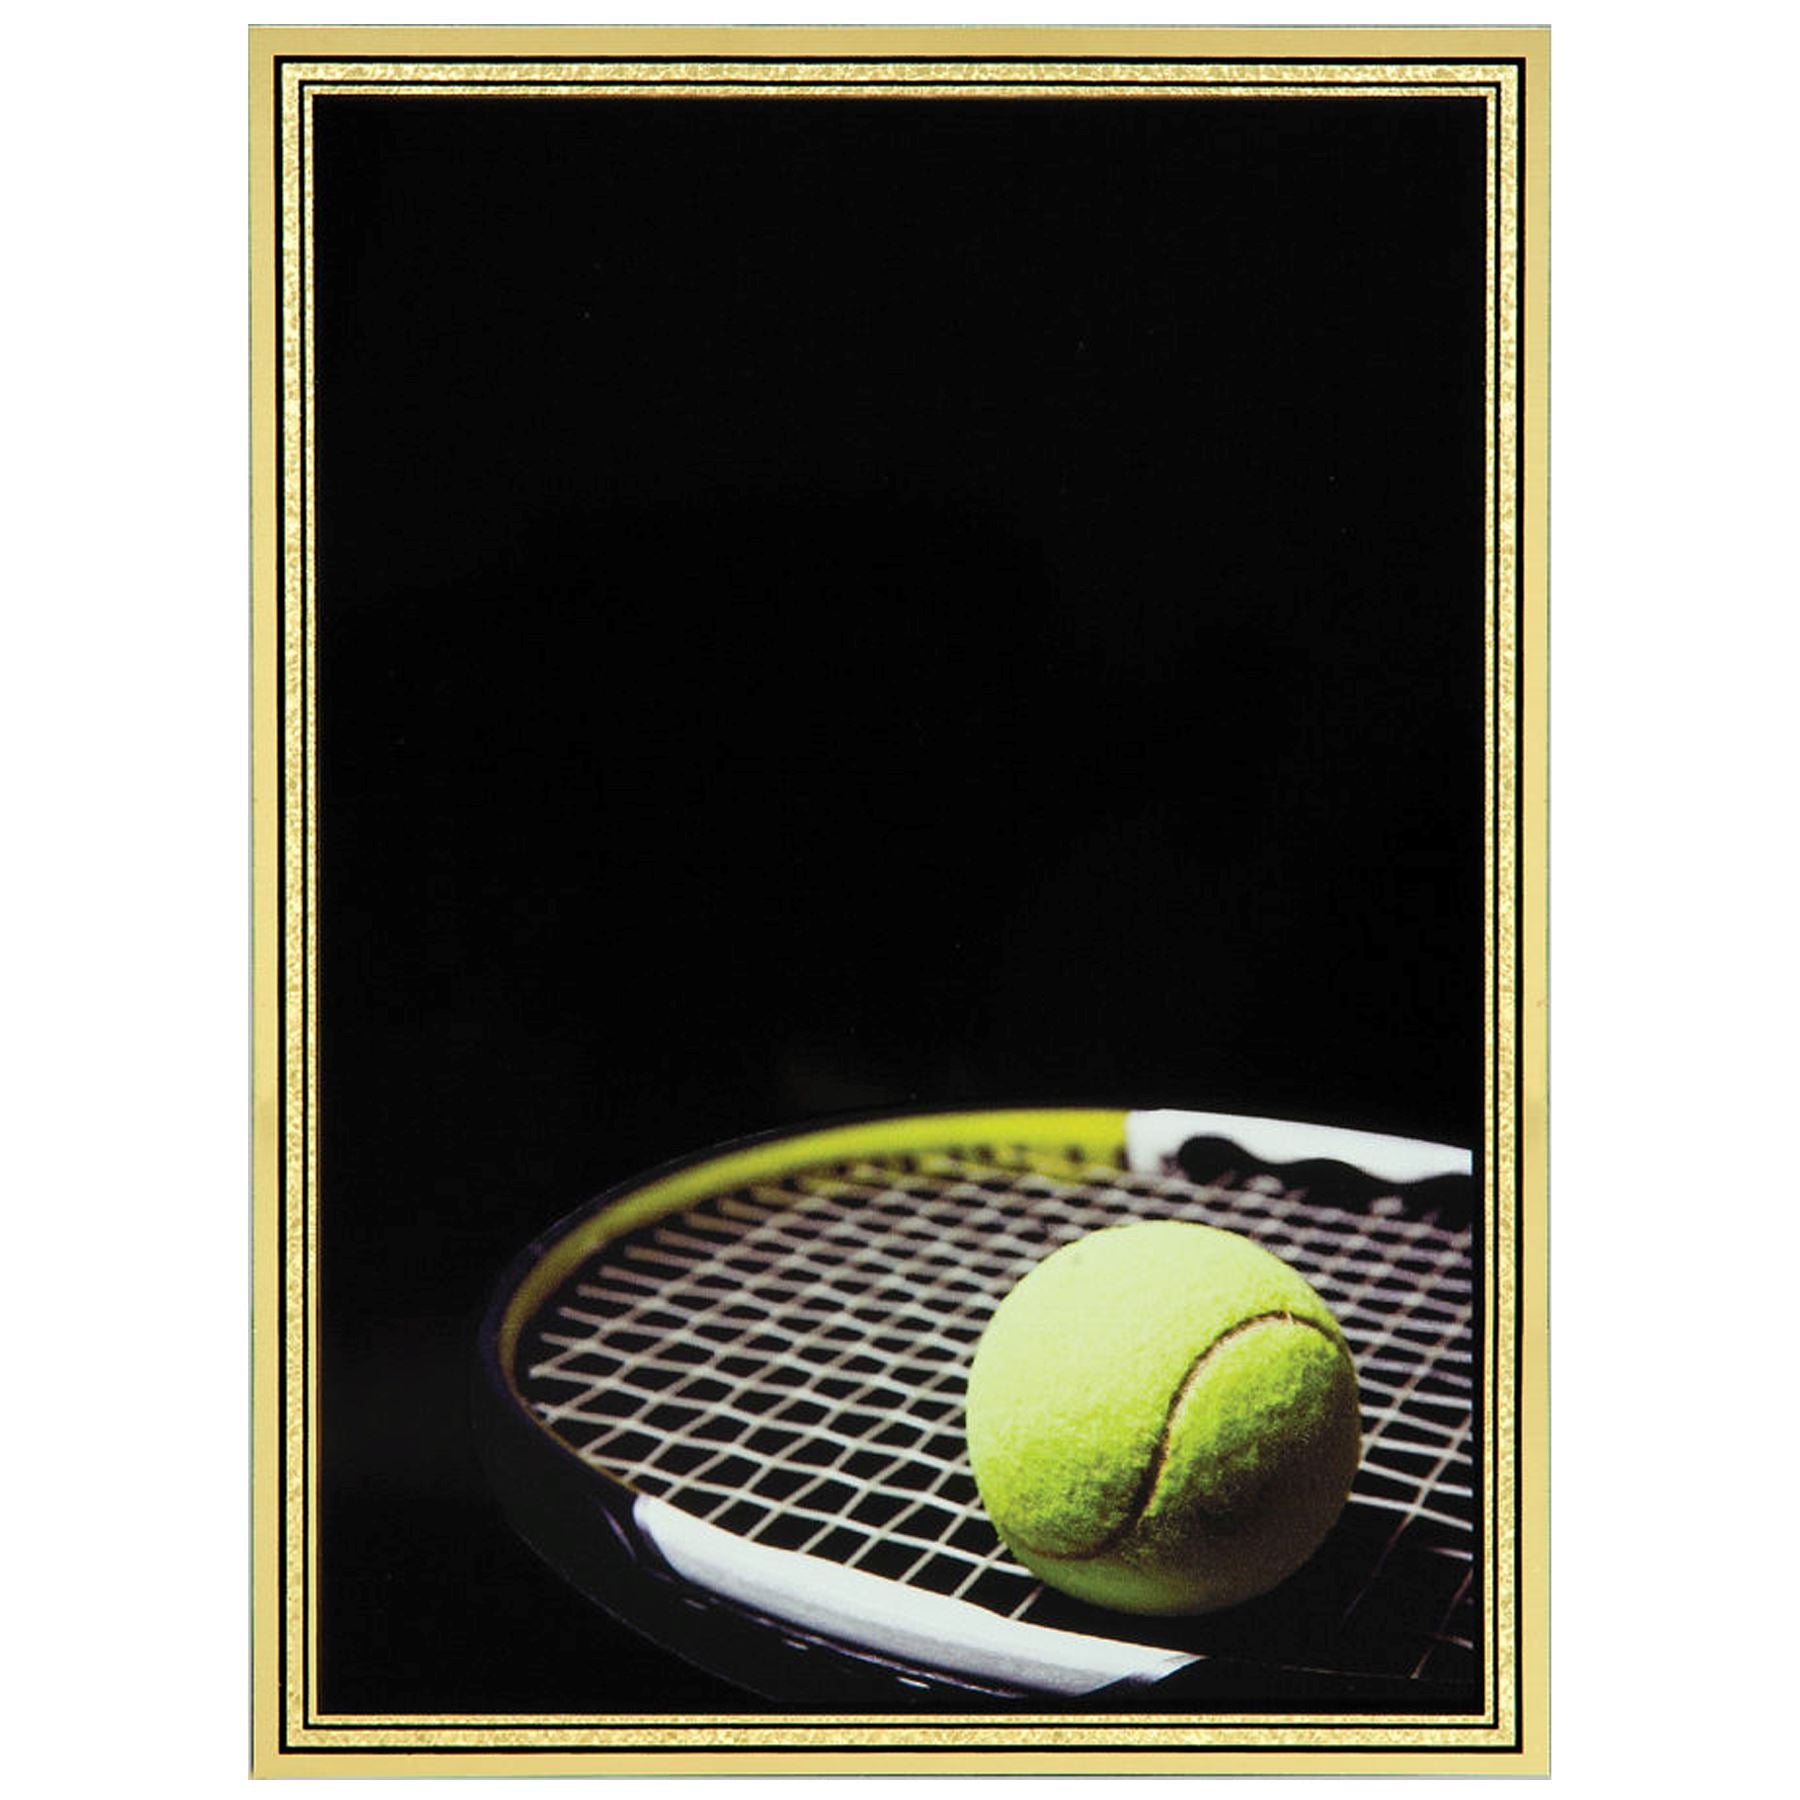 Brass Plated Steel Hi-Def Plaque Plate, Tennis, 5 7/8" x 7 7/8" Plaque Craftworks NW 